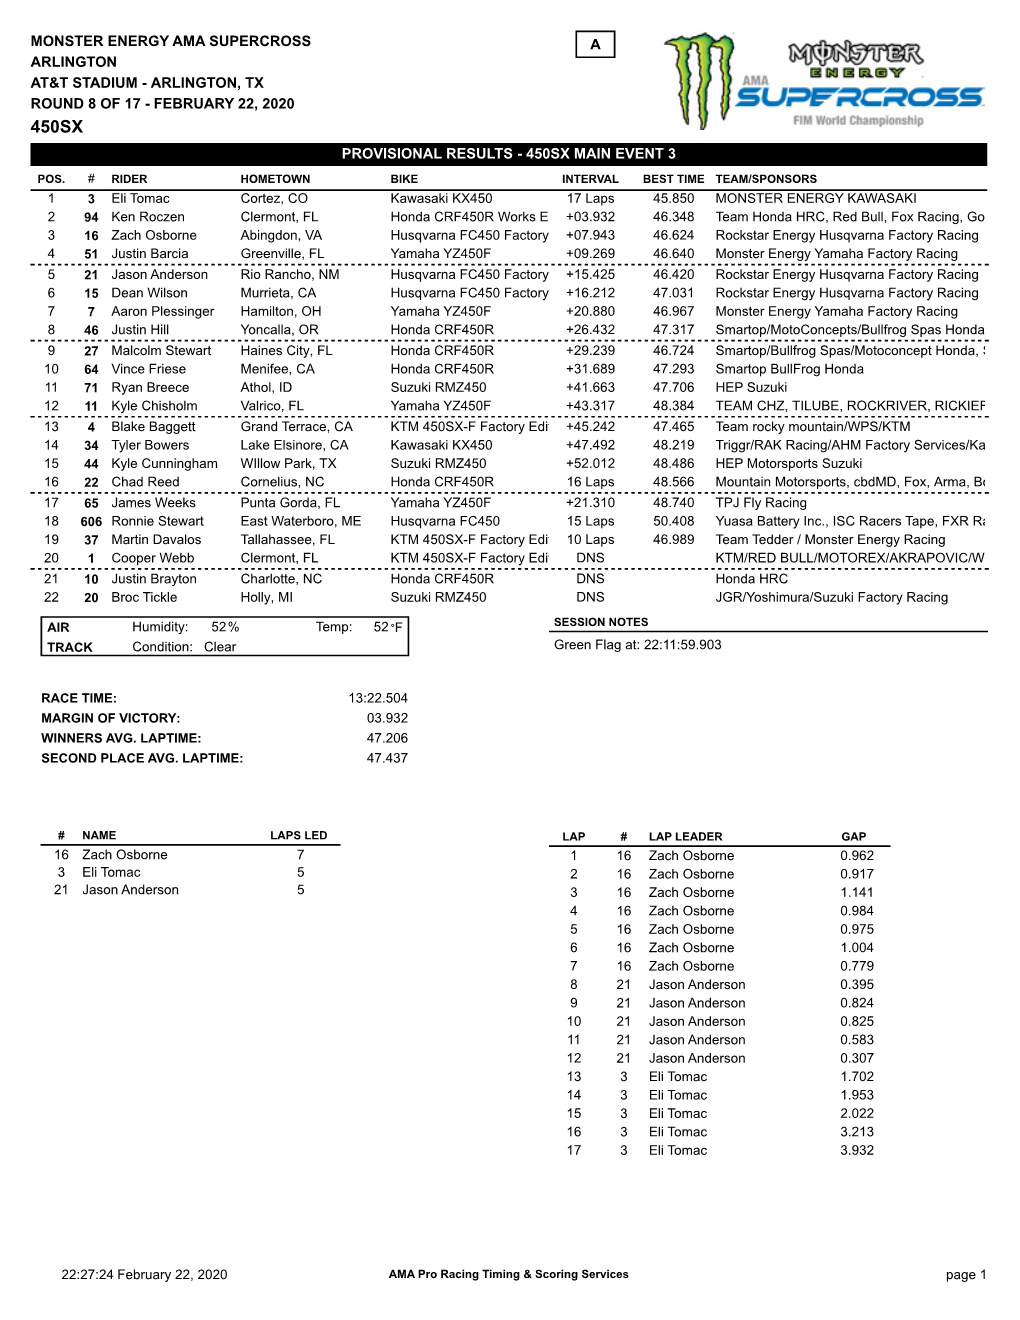 Provisional Results - 450Sx Main Event 3